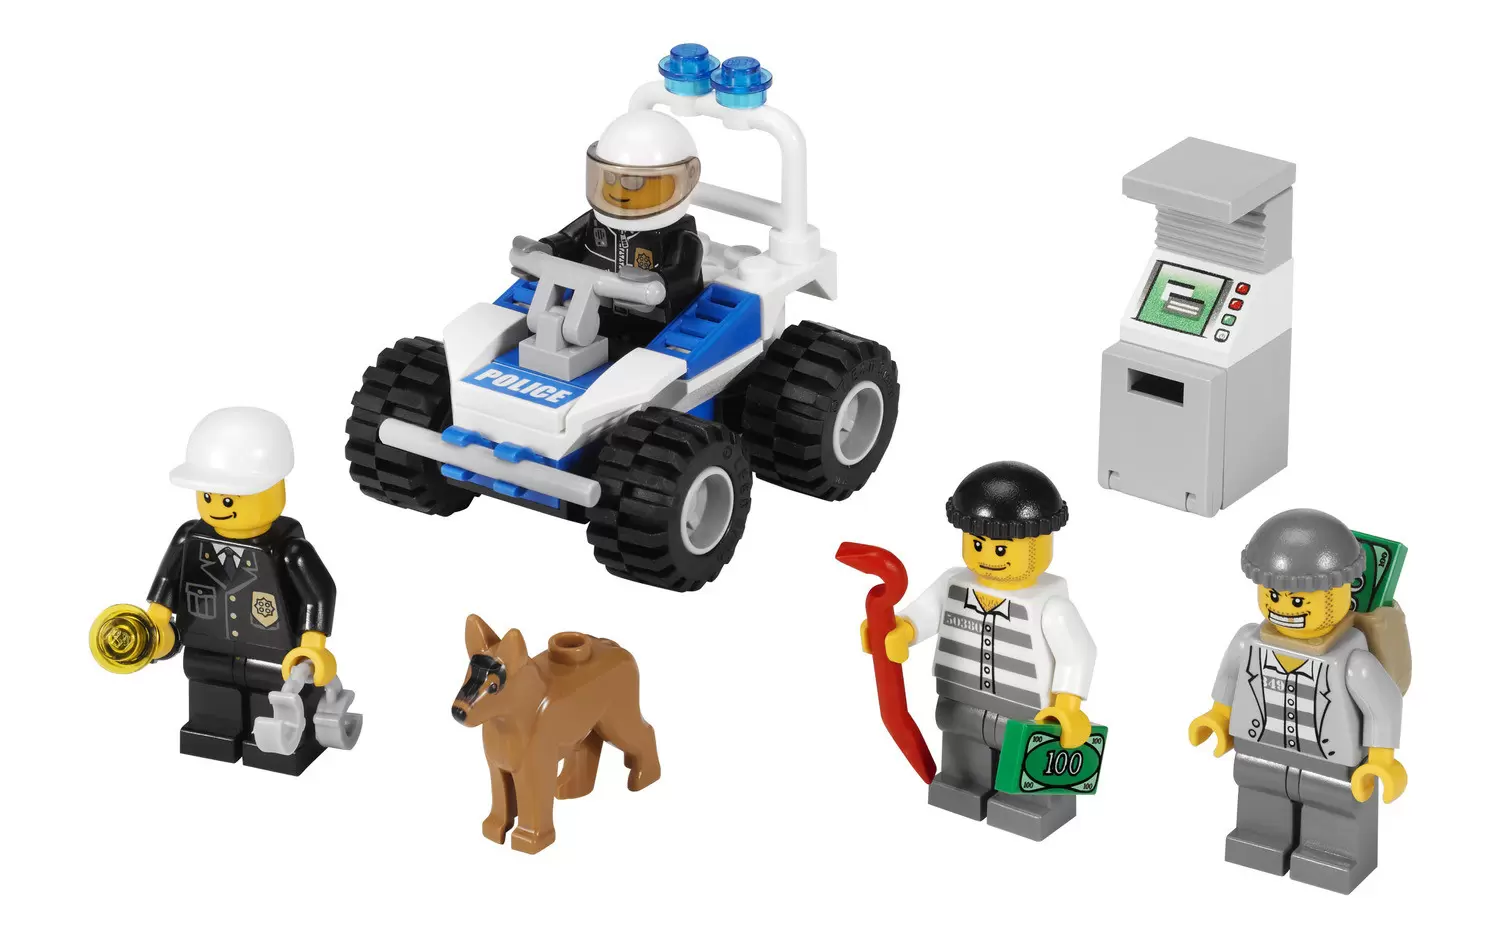 LEGO CITY - Police Minifigure Collection